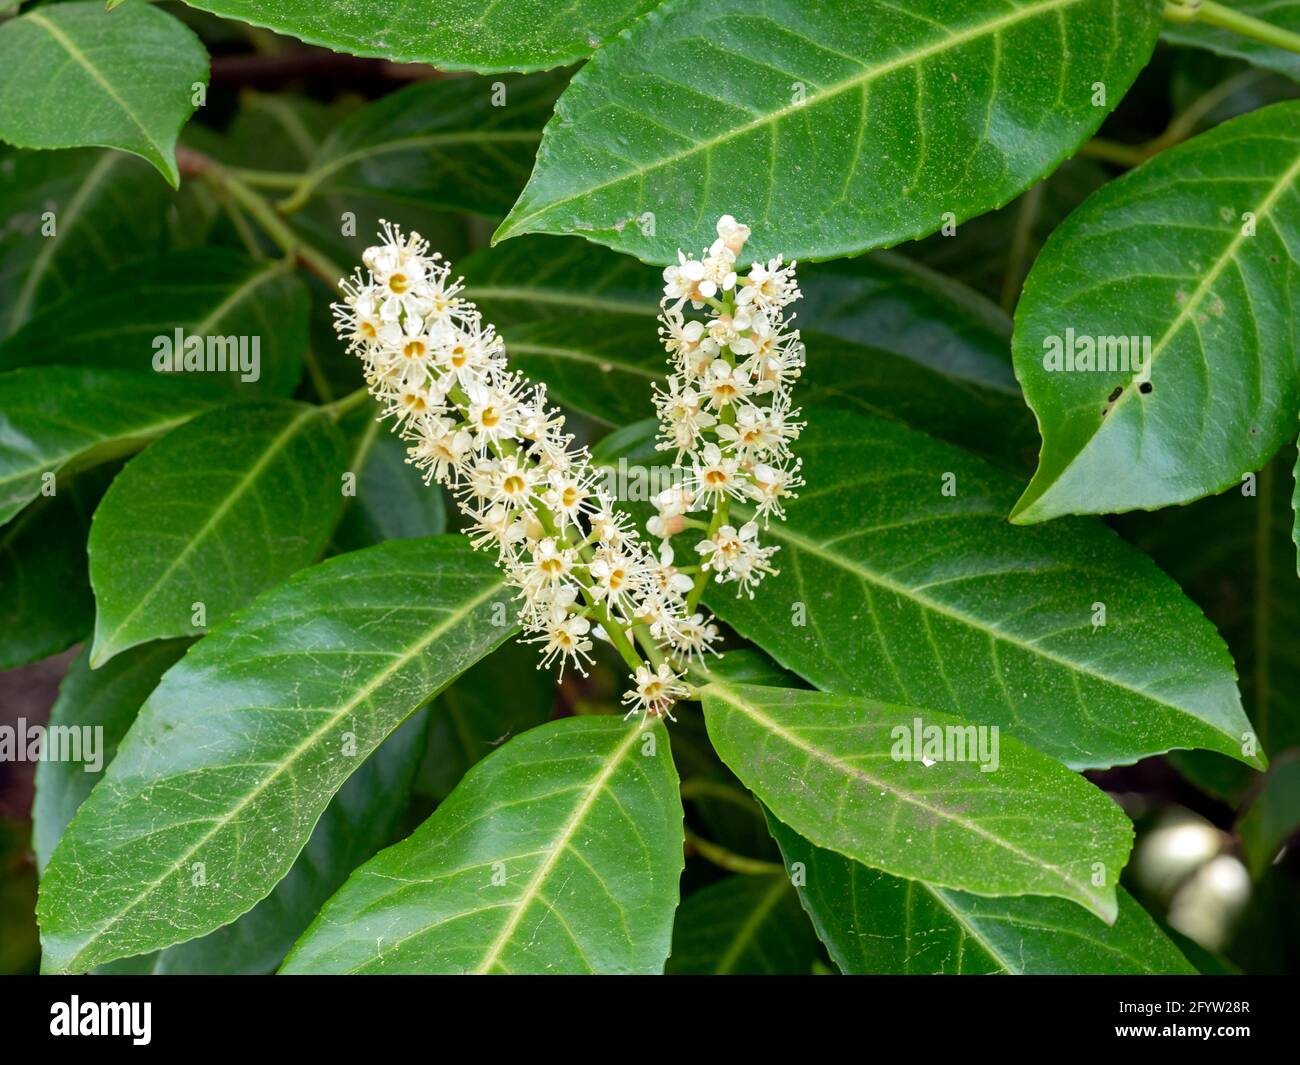 White flowers and green leaves on a laurel bush Stock Photo